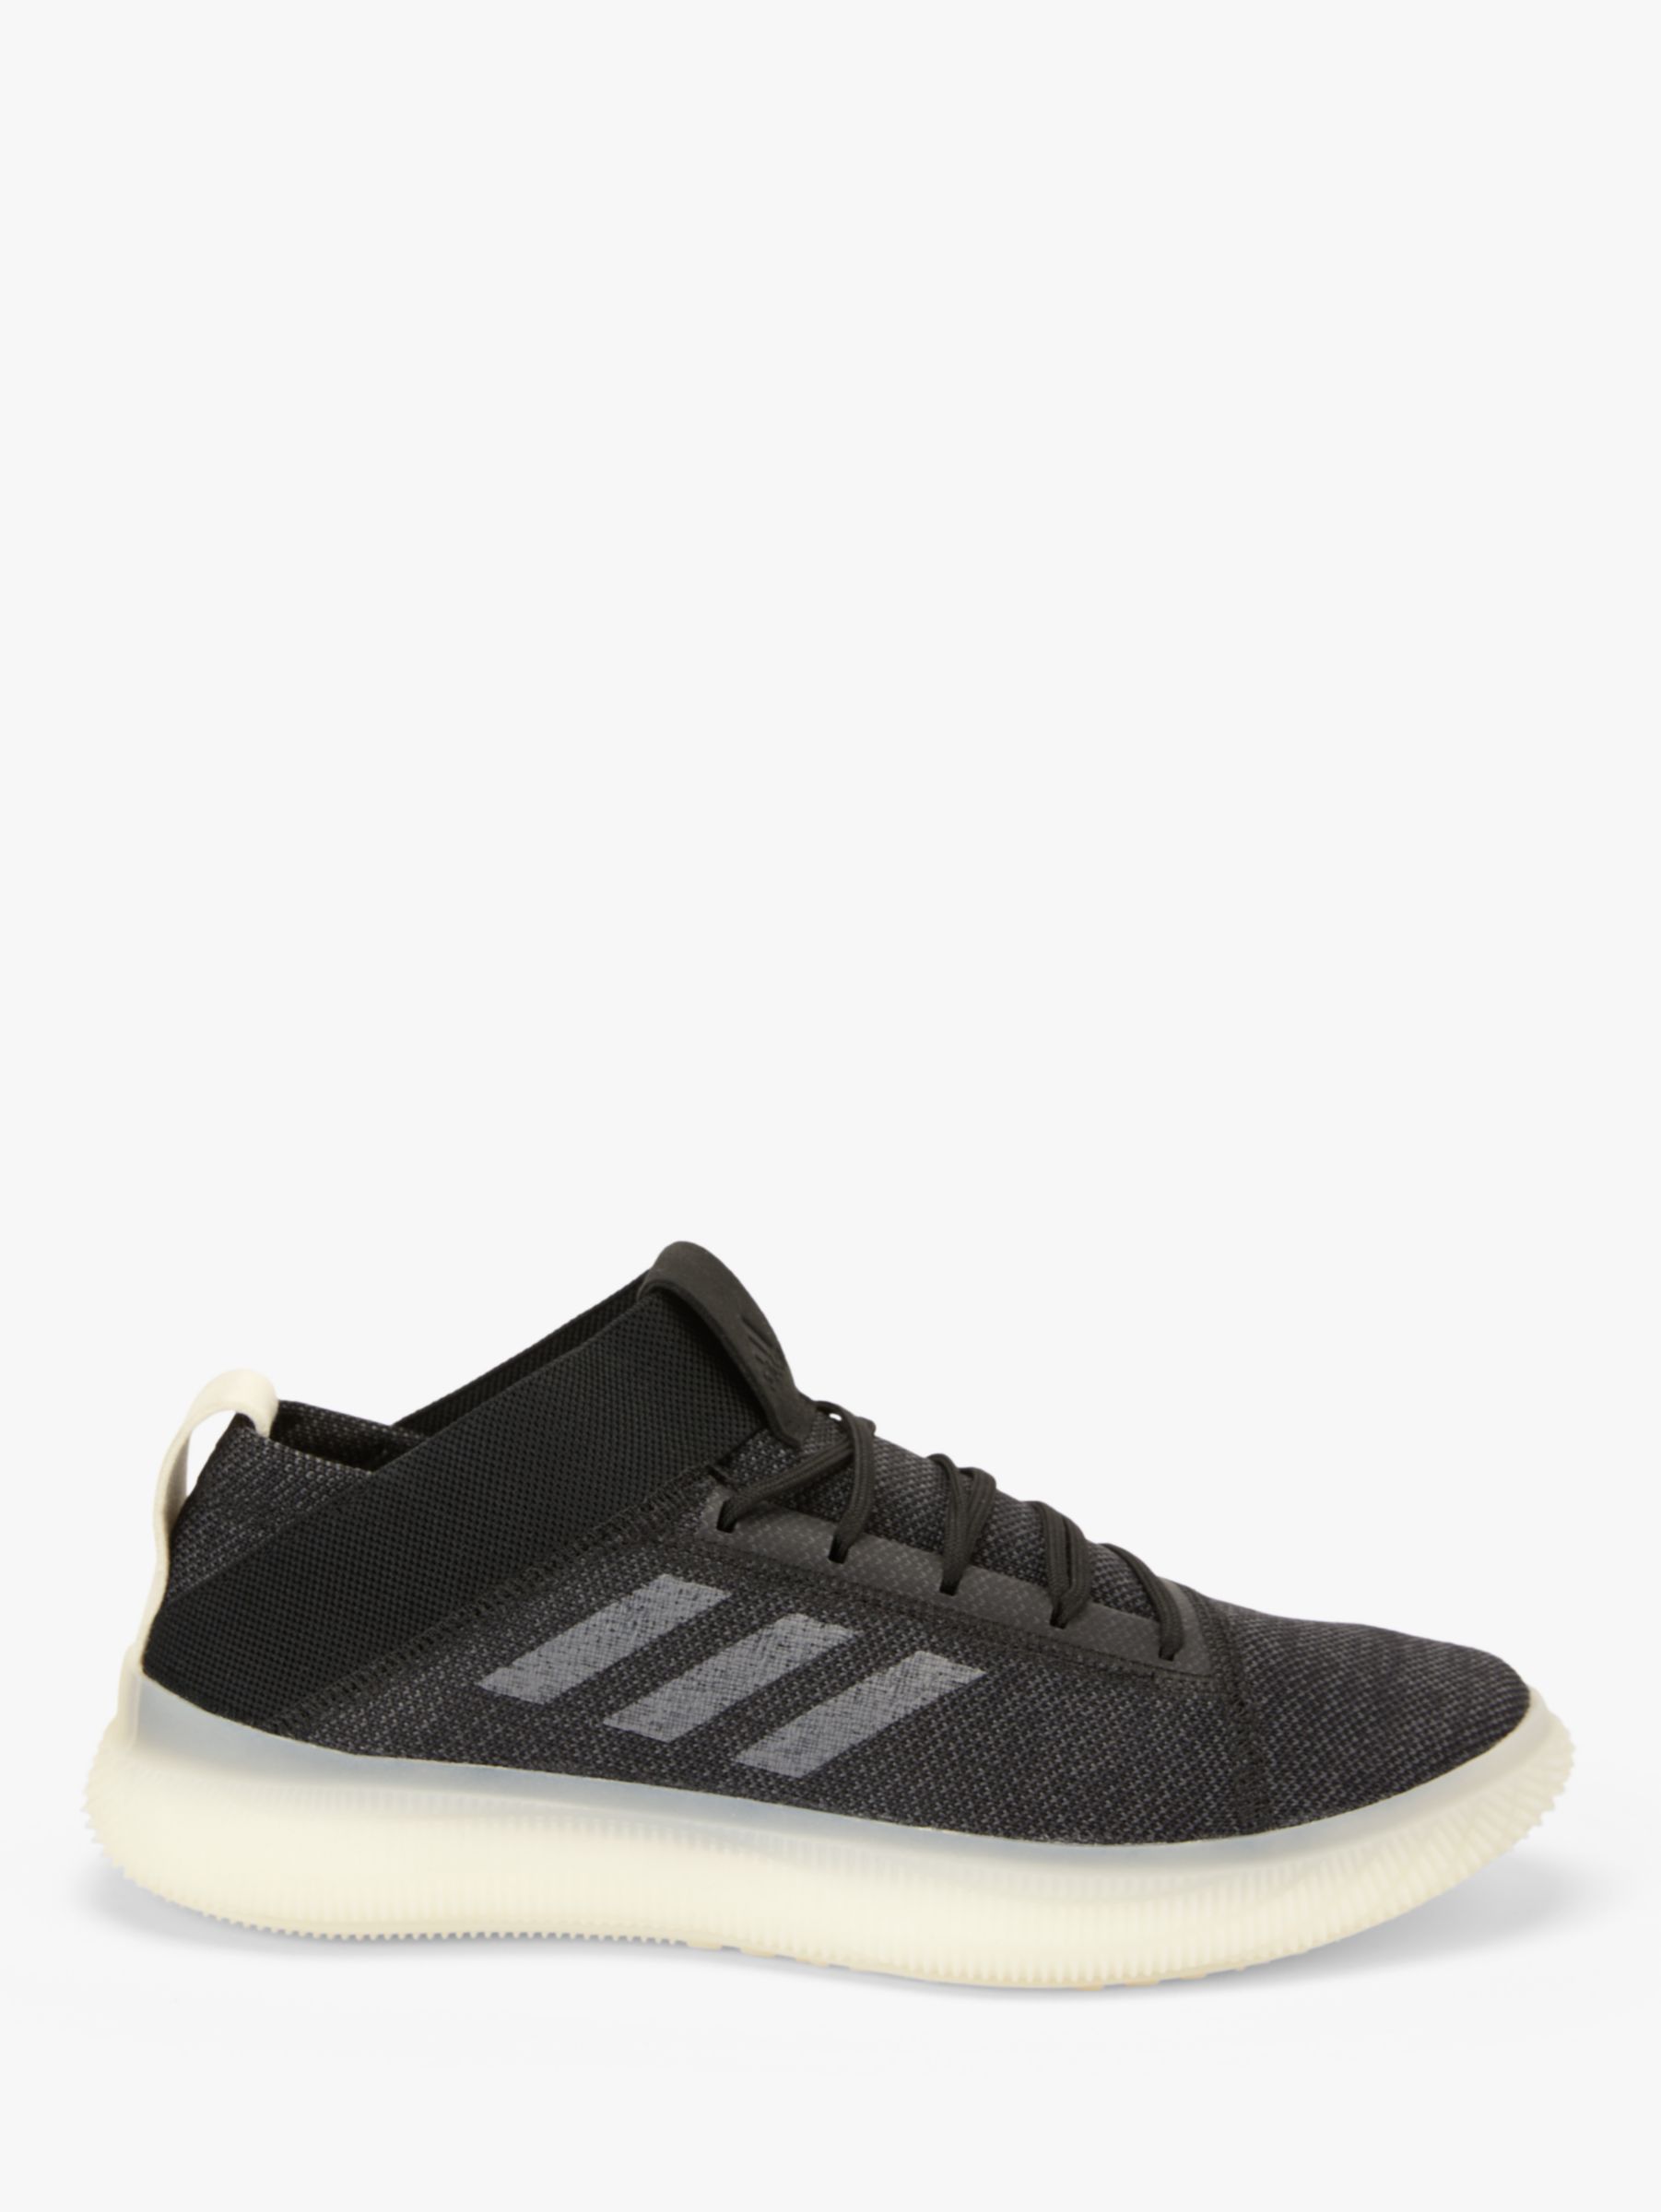 adidas pure boost trainer mens